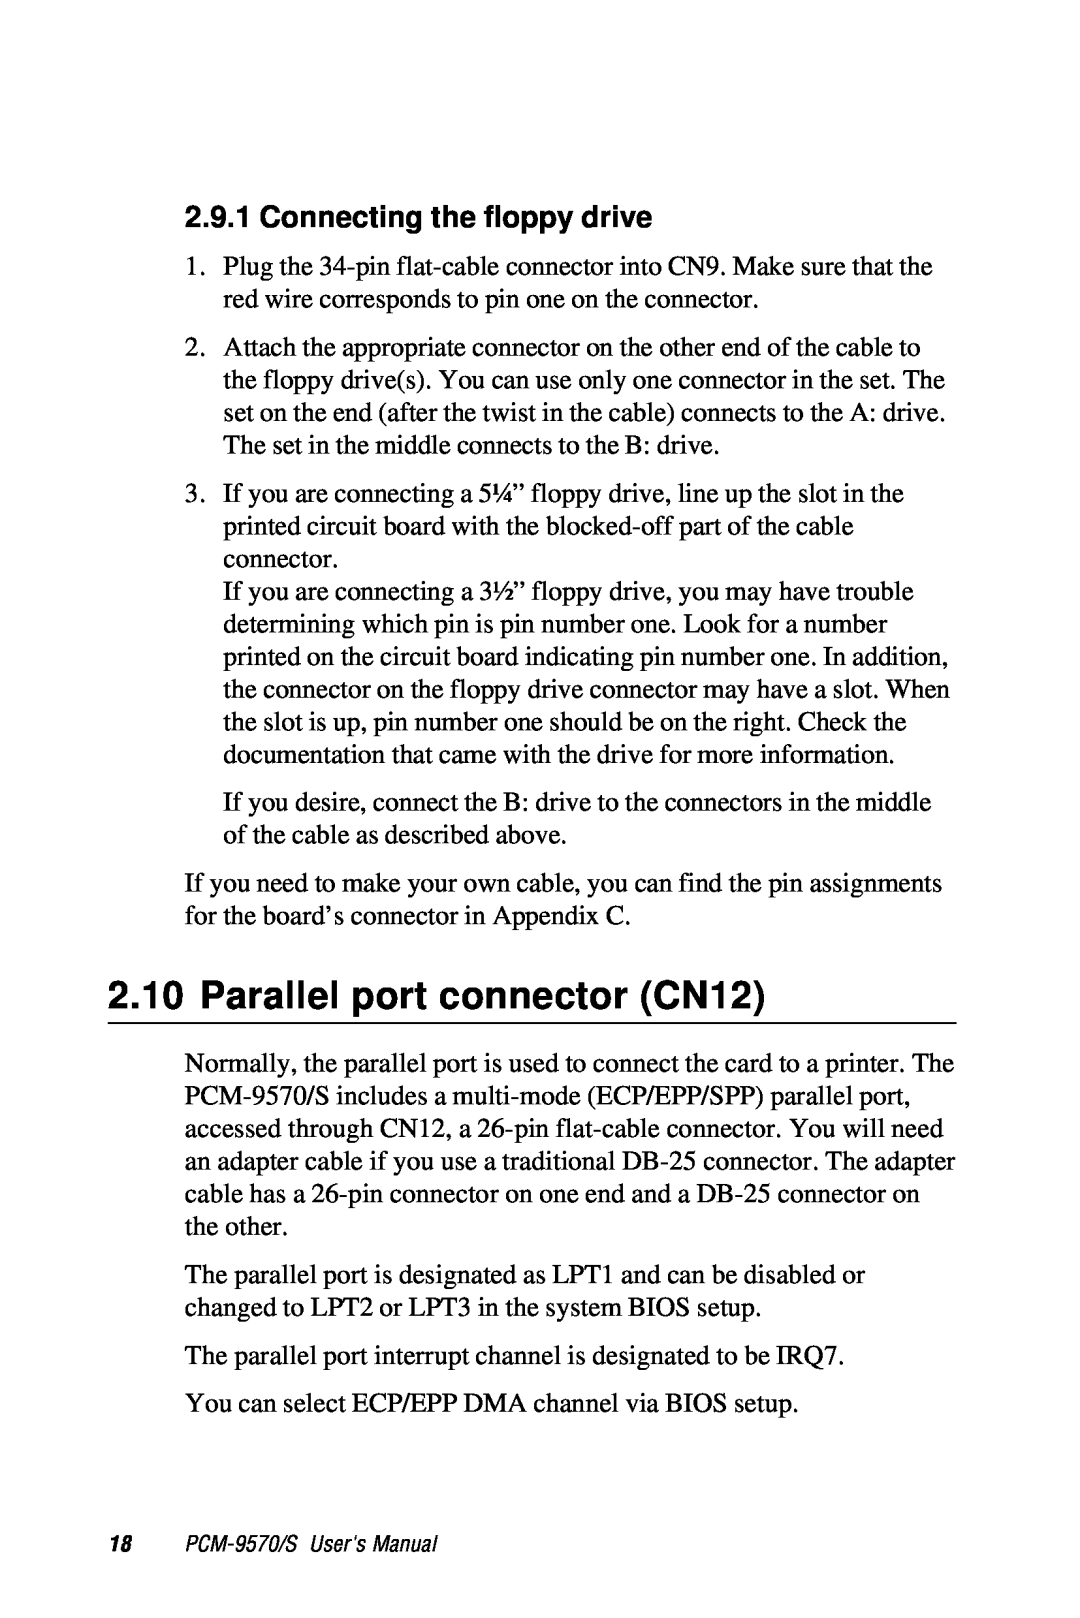 Advantech 2006957006 5th Edition user manual Parallel port connector CN12, Connecting the floppy drive 